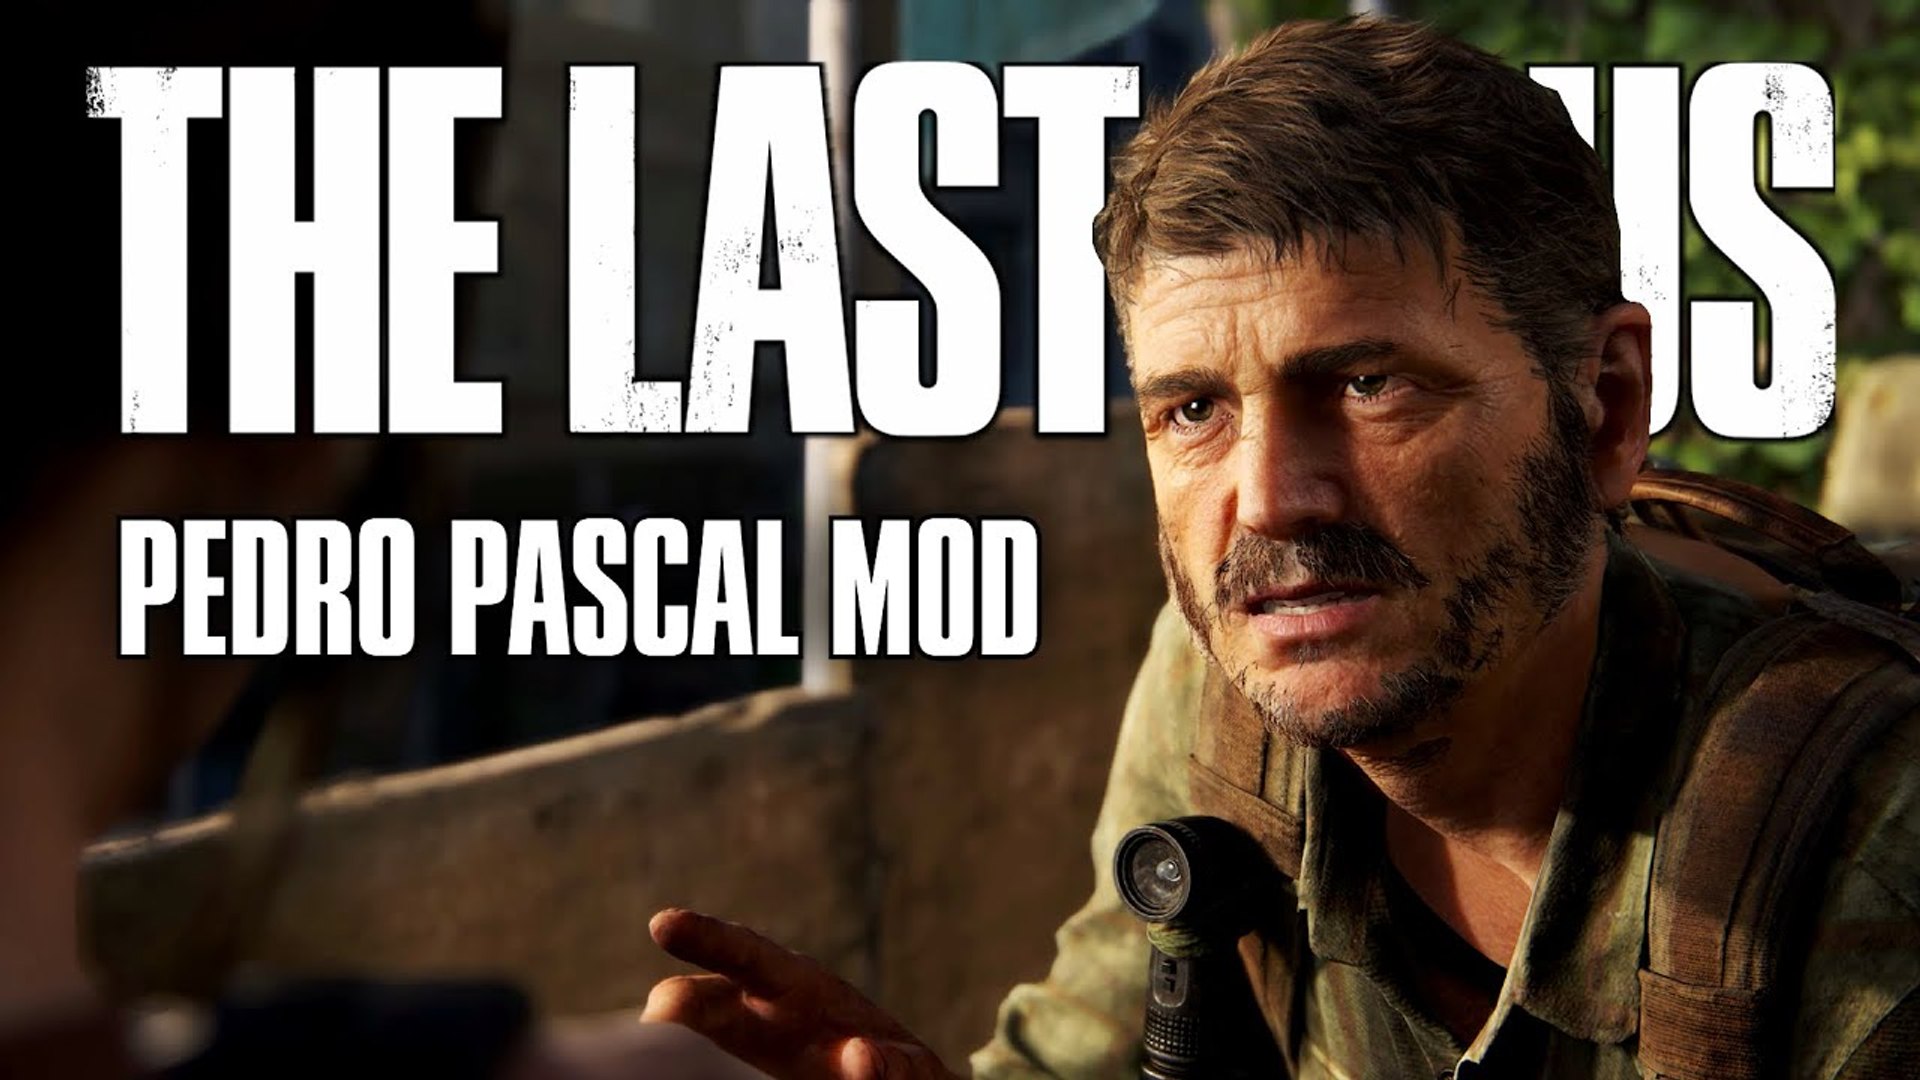 The Last of Us: Episode 3 Preview Trailer - Pedro Pascal, Nick